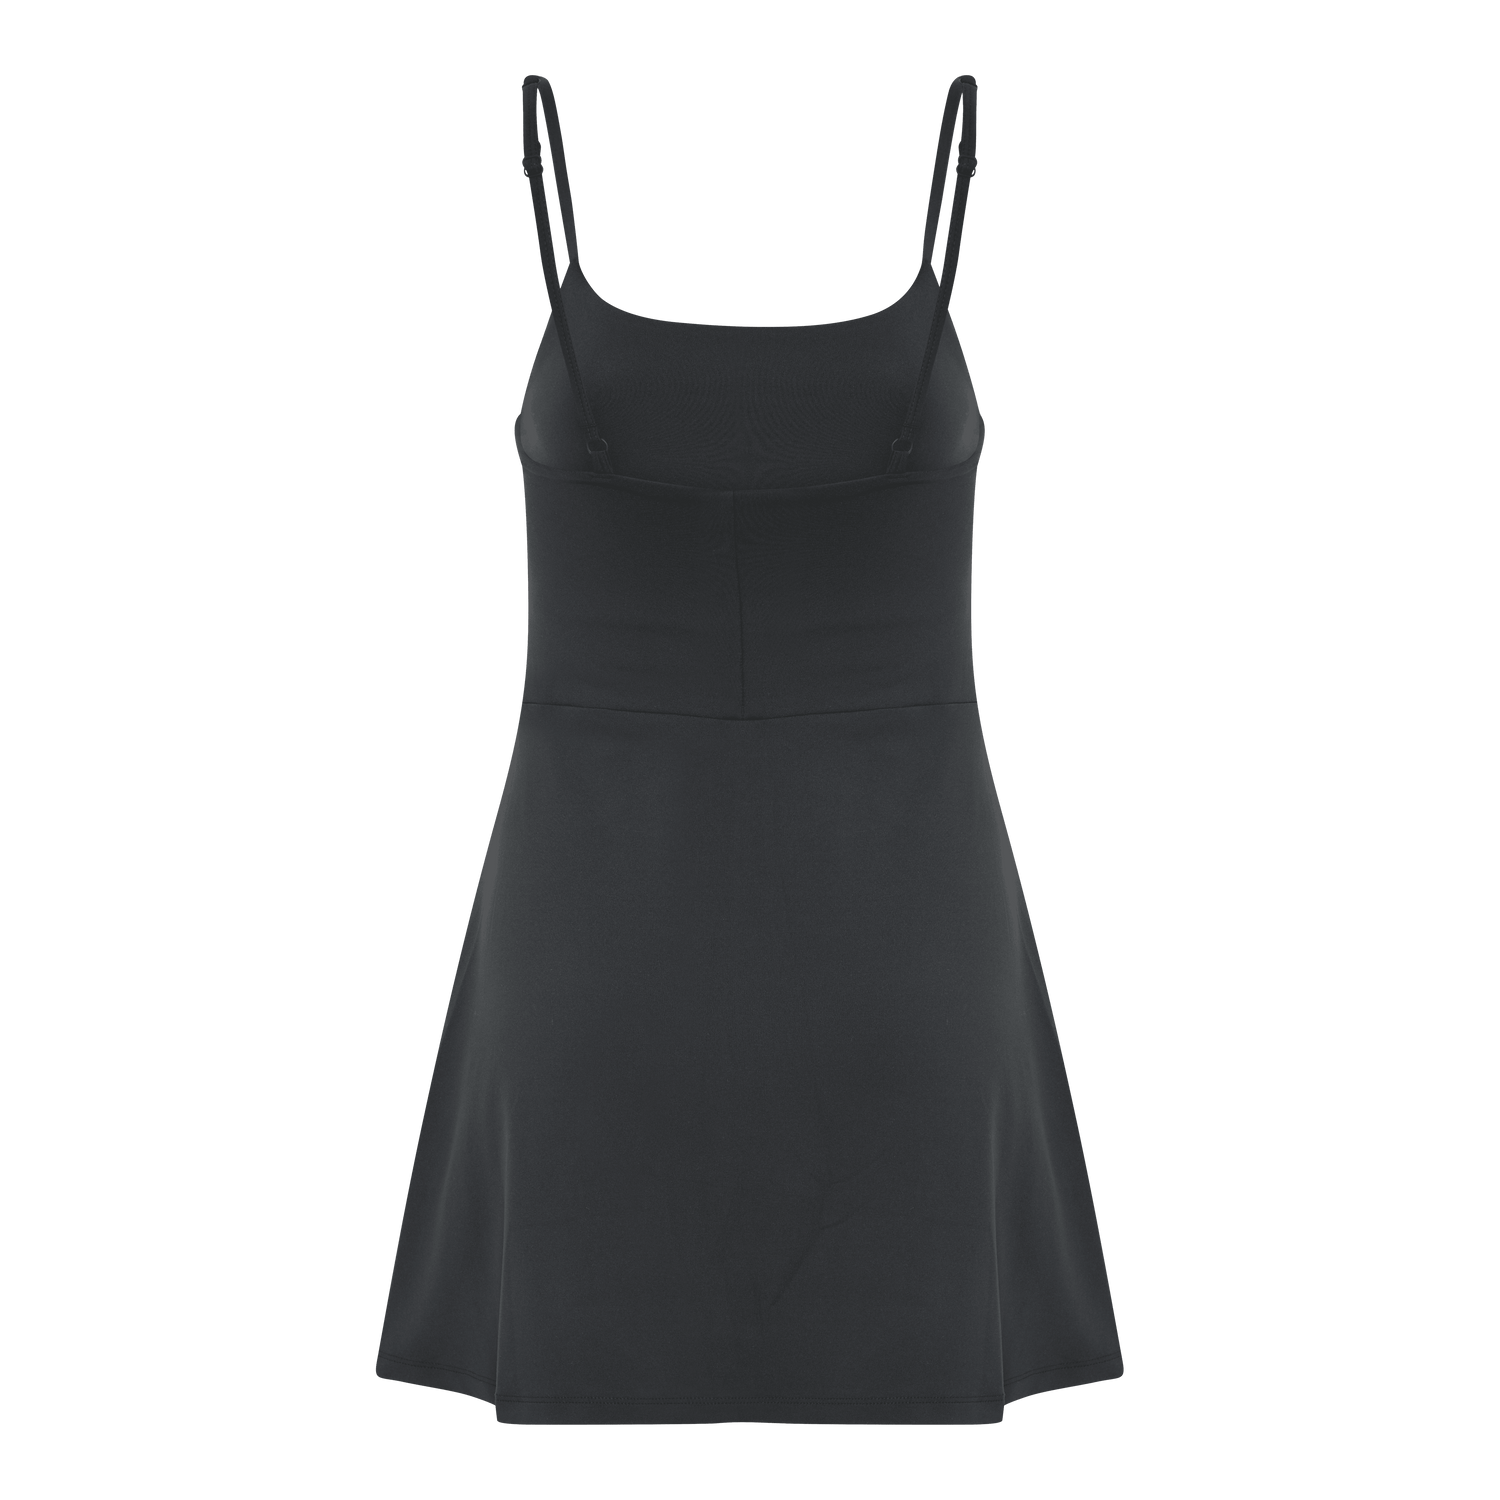 Girlfriend Collective Float Juliet Strappy Dress - Recycled Polyester Black Dress